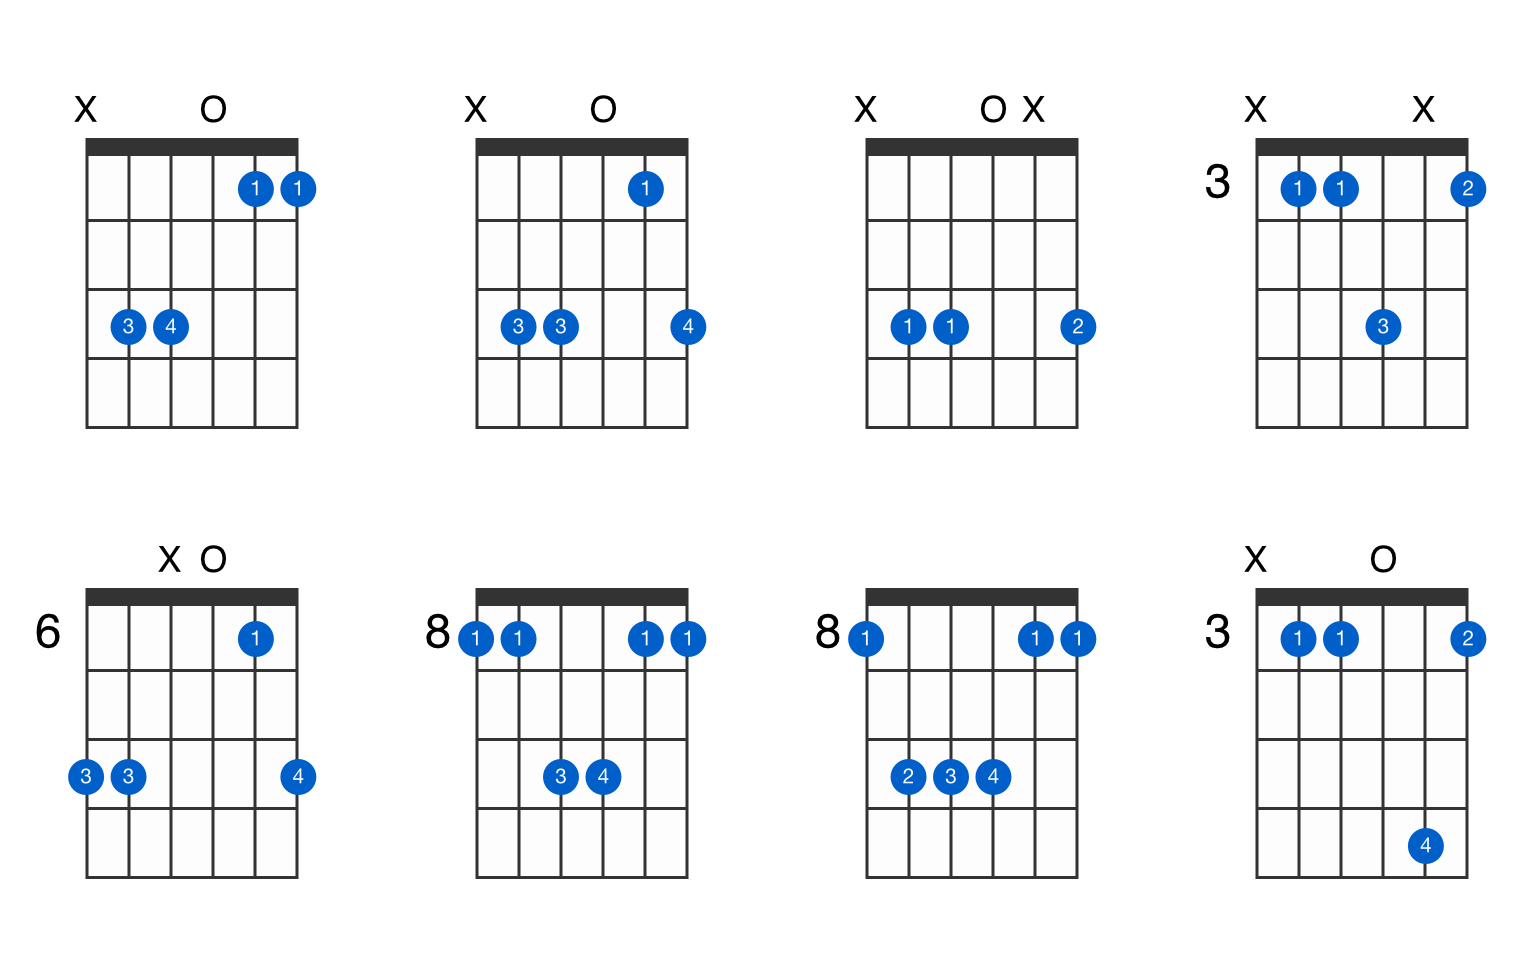 suspended guitar chords